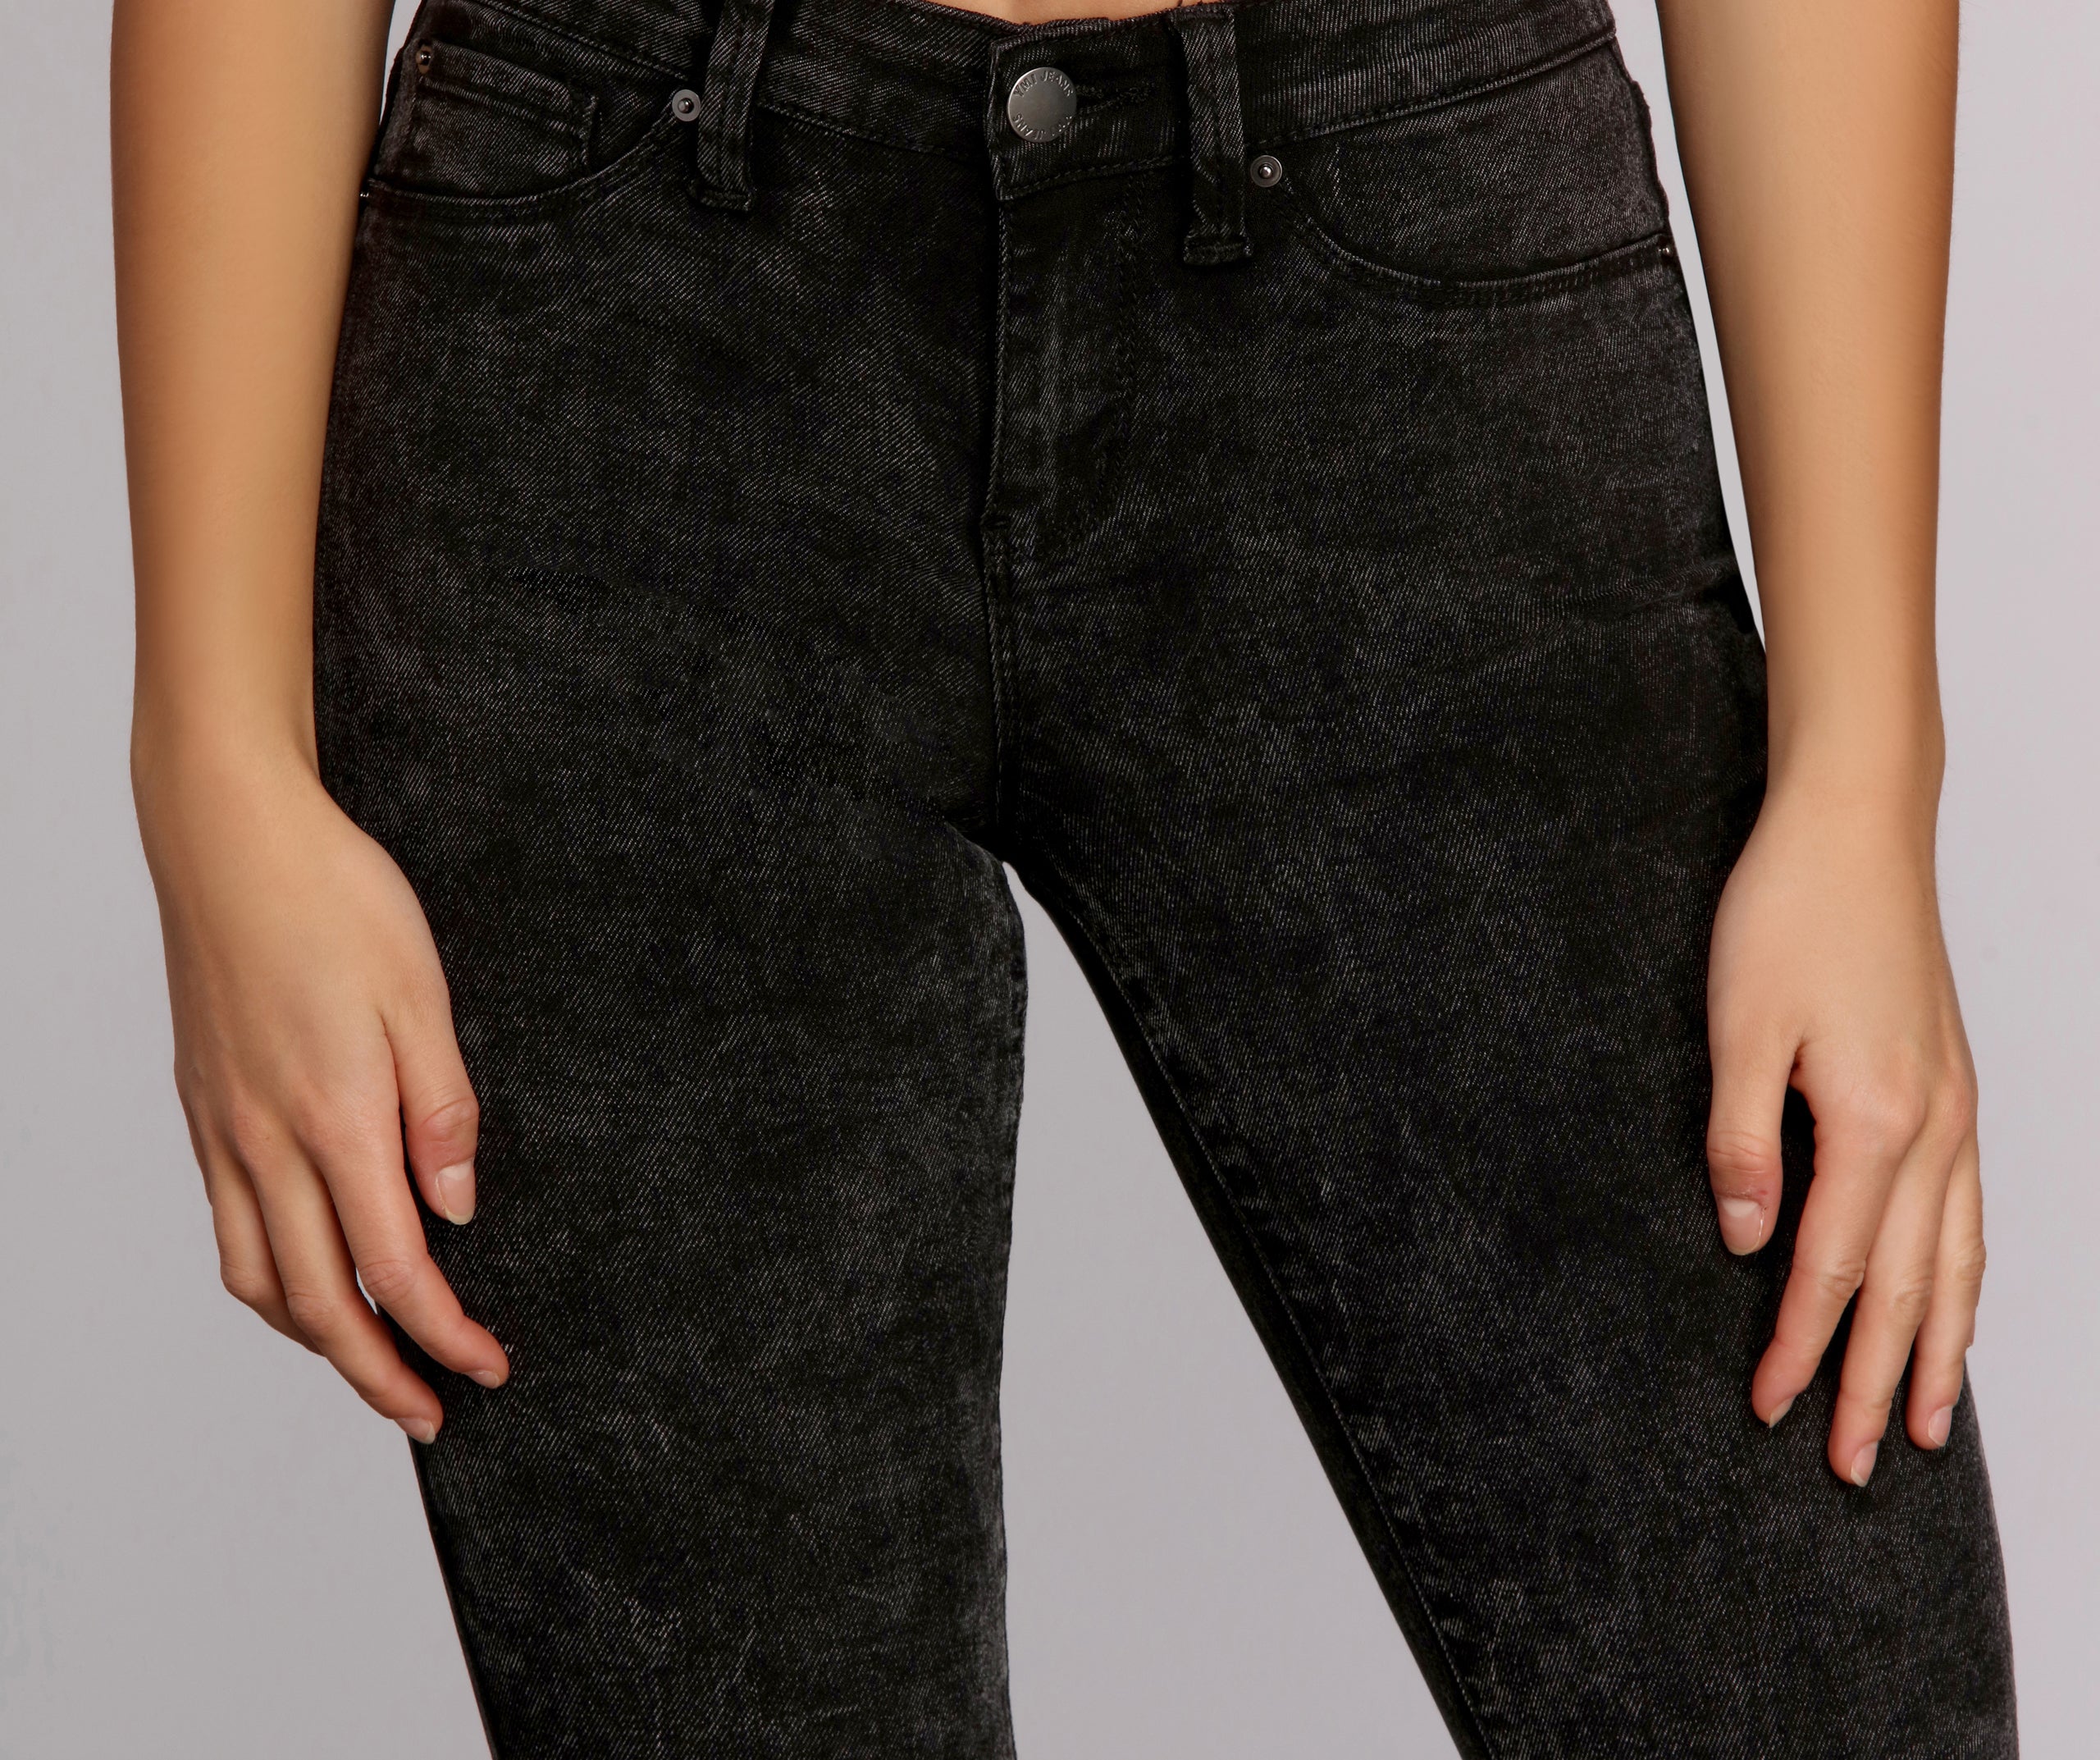 Rise Up High Waist Skinny Jeans